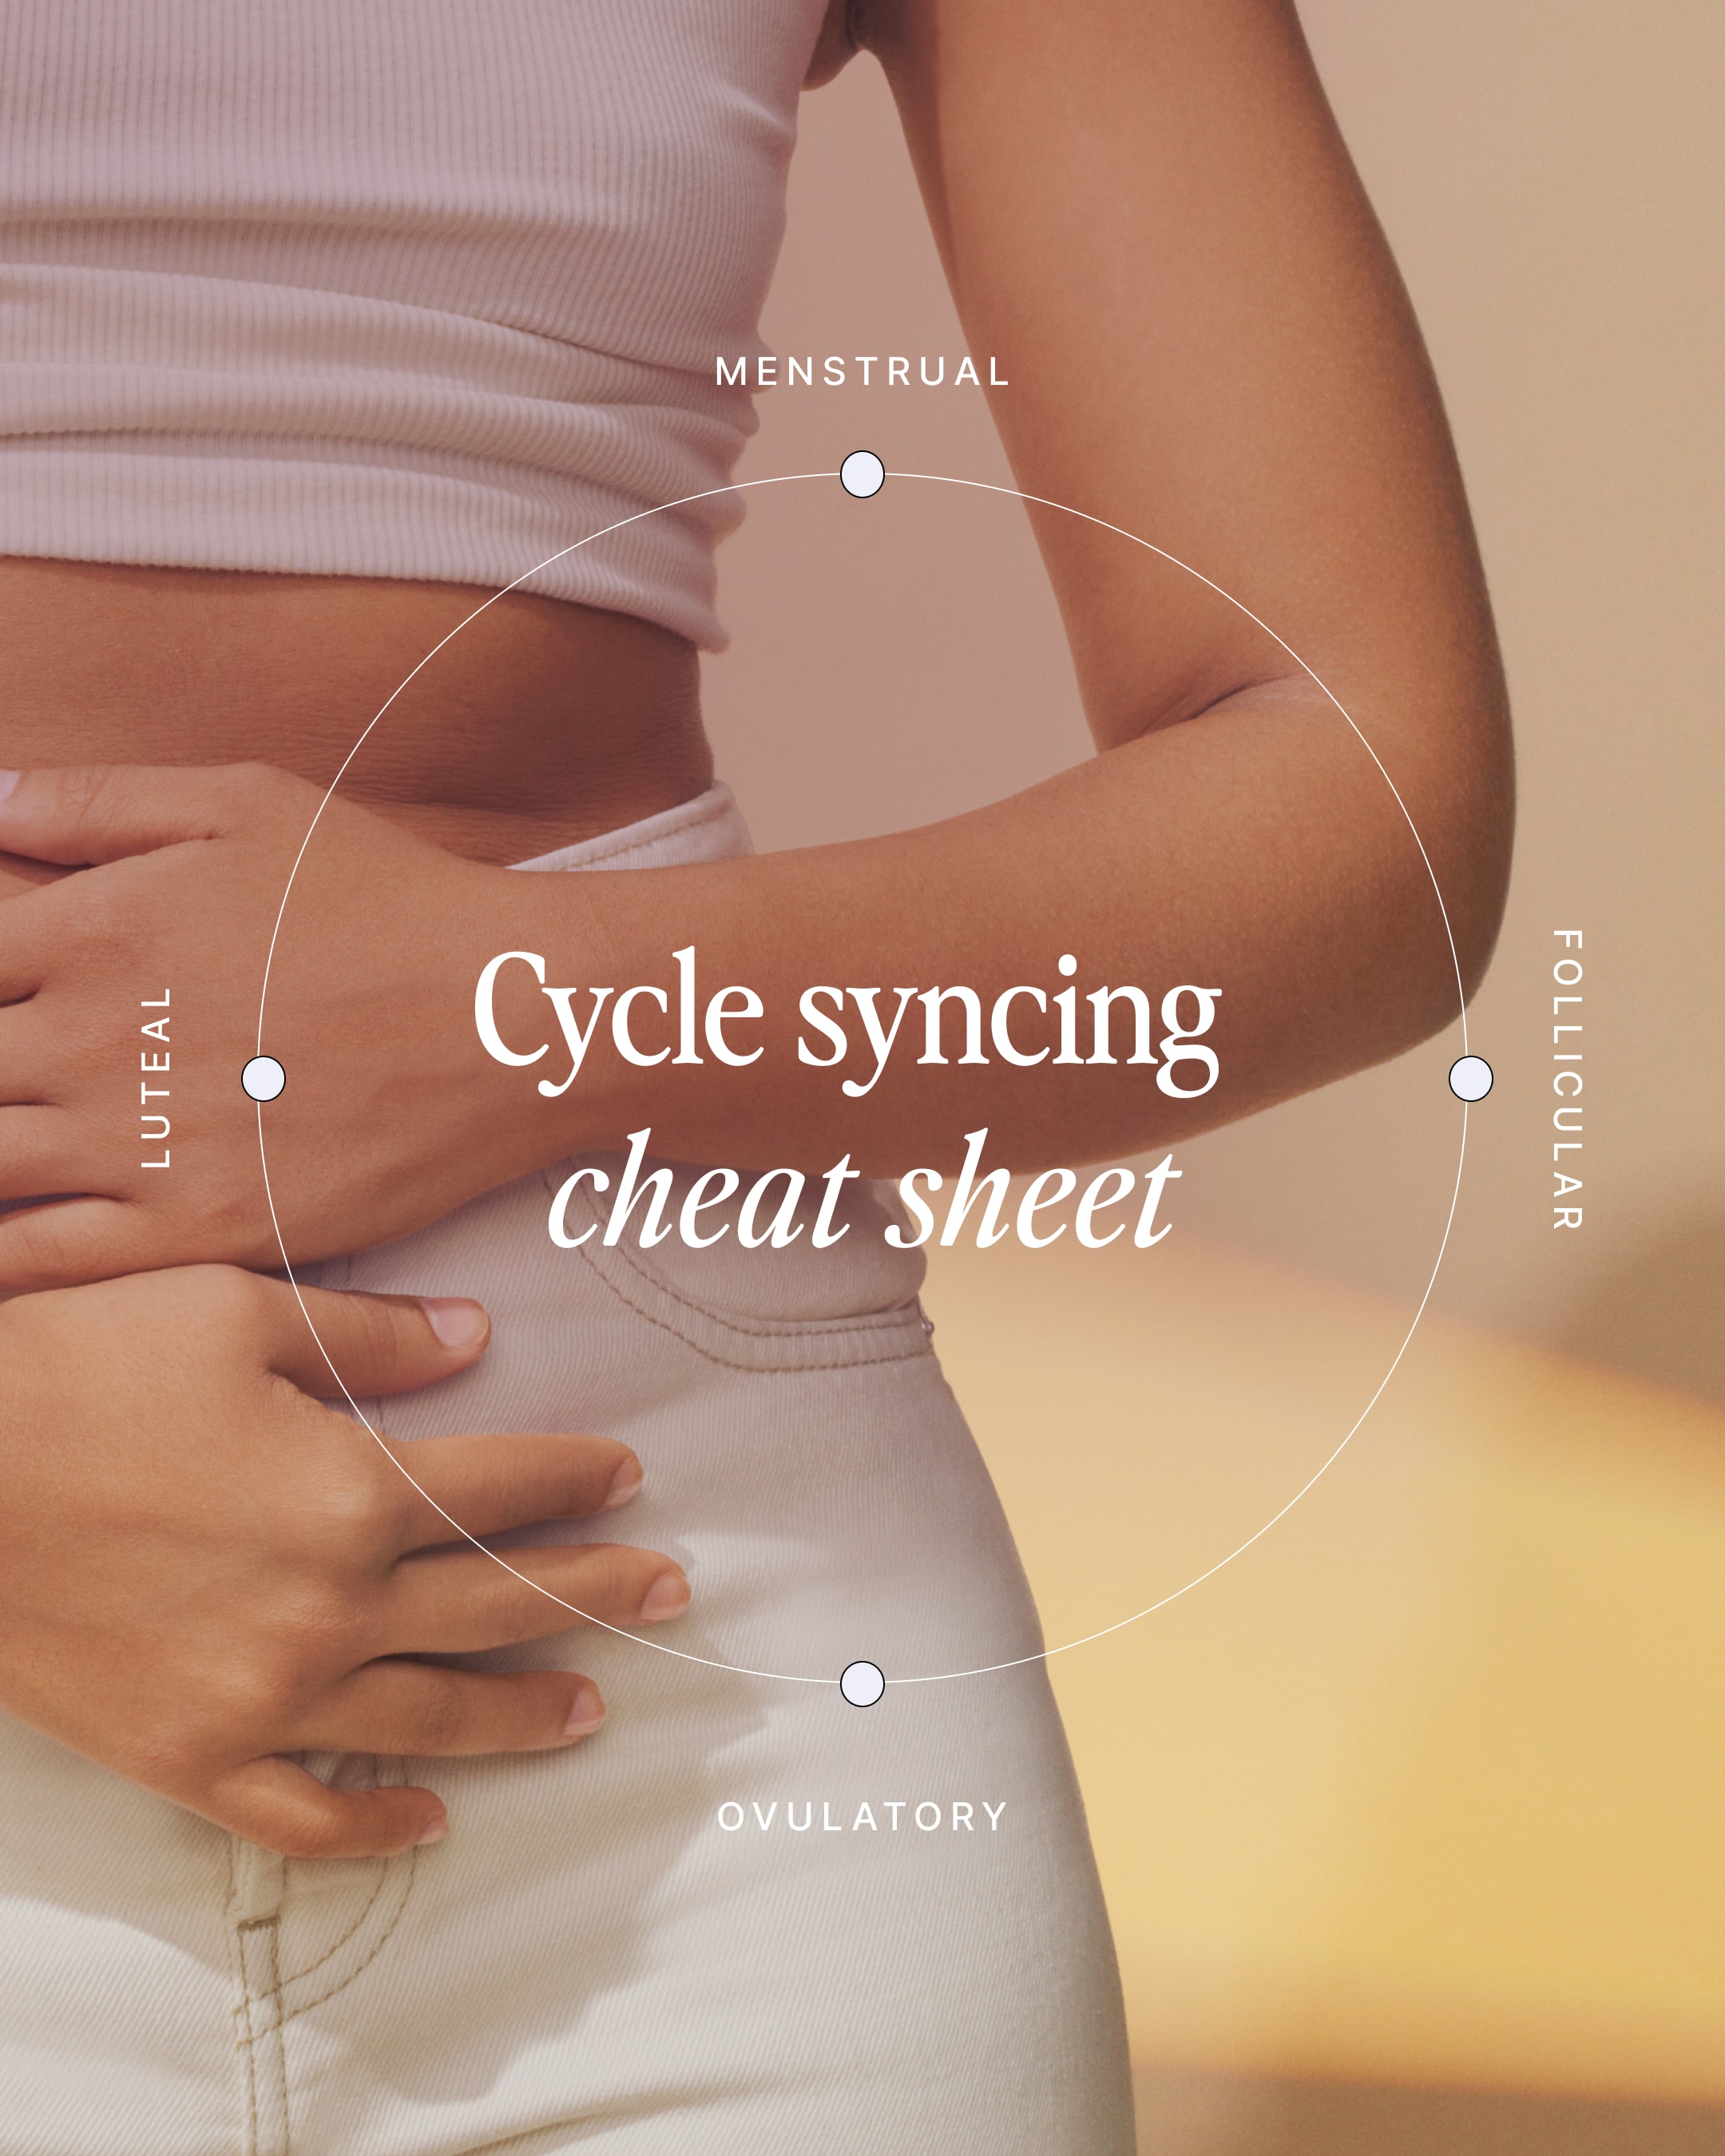 Cycle Syncing Your Exercise Routine Can Help You Maximize Your